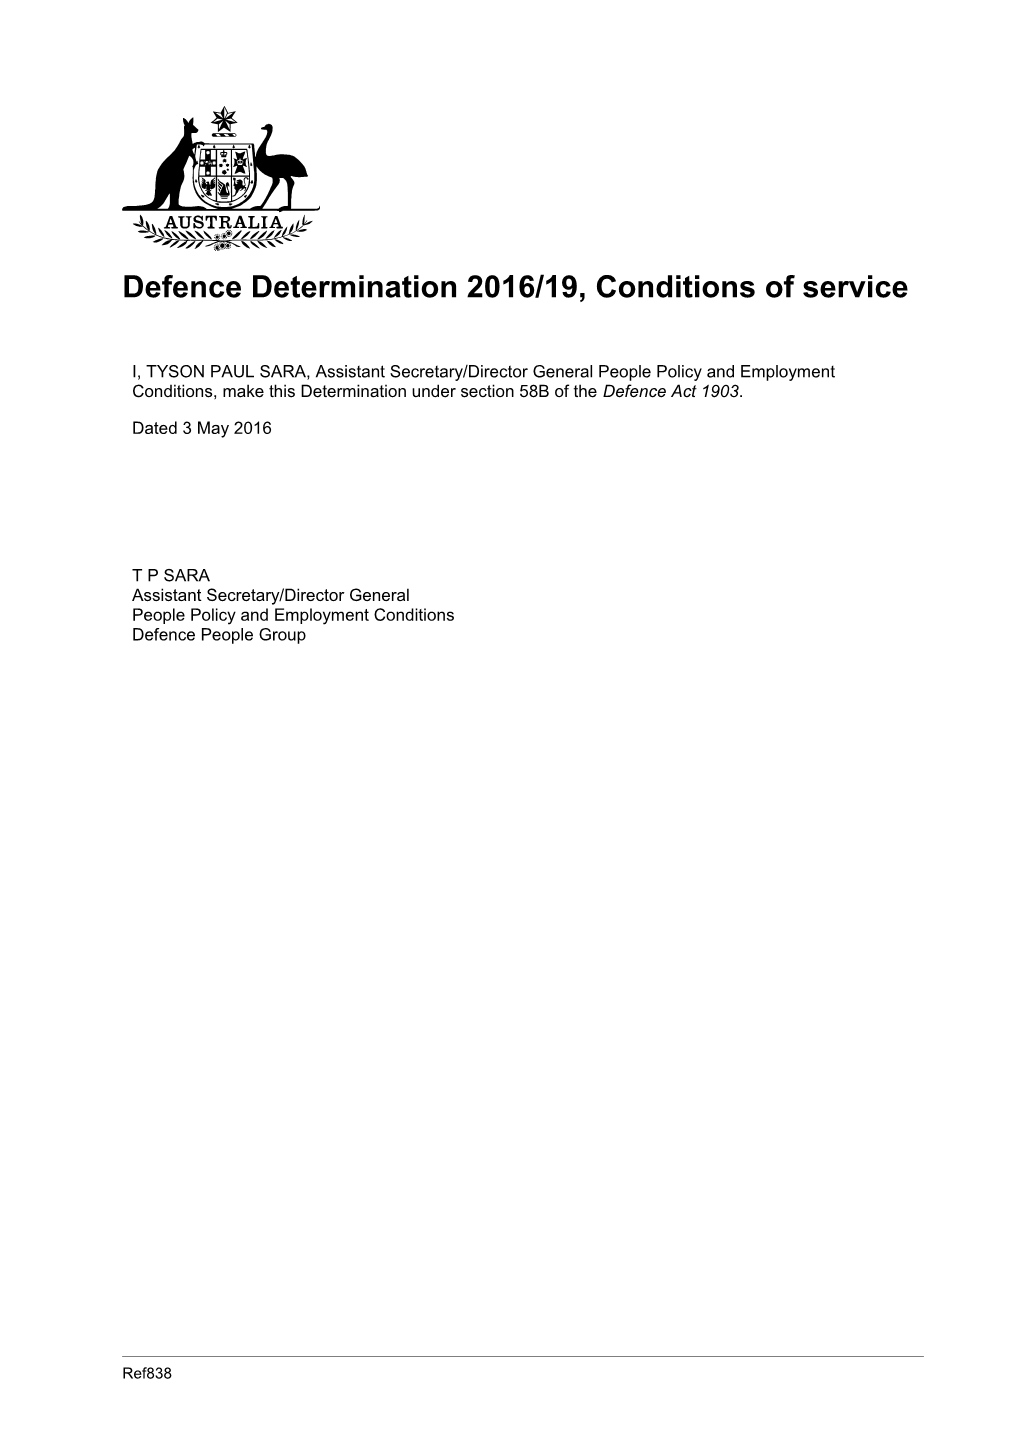 Defence Determination 2016/19, Conditions of Service